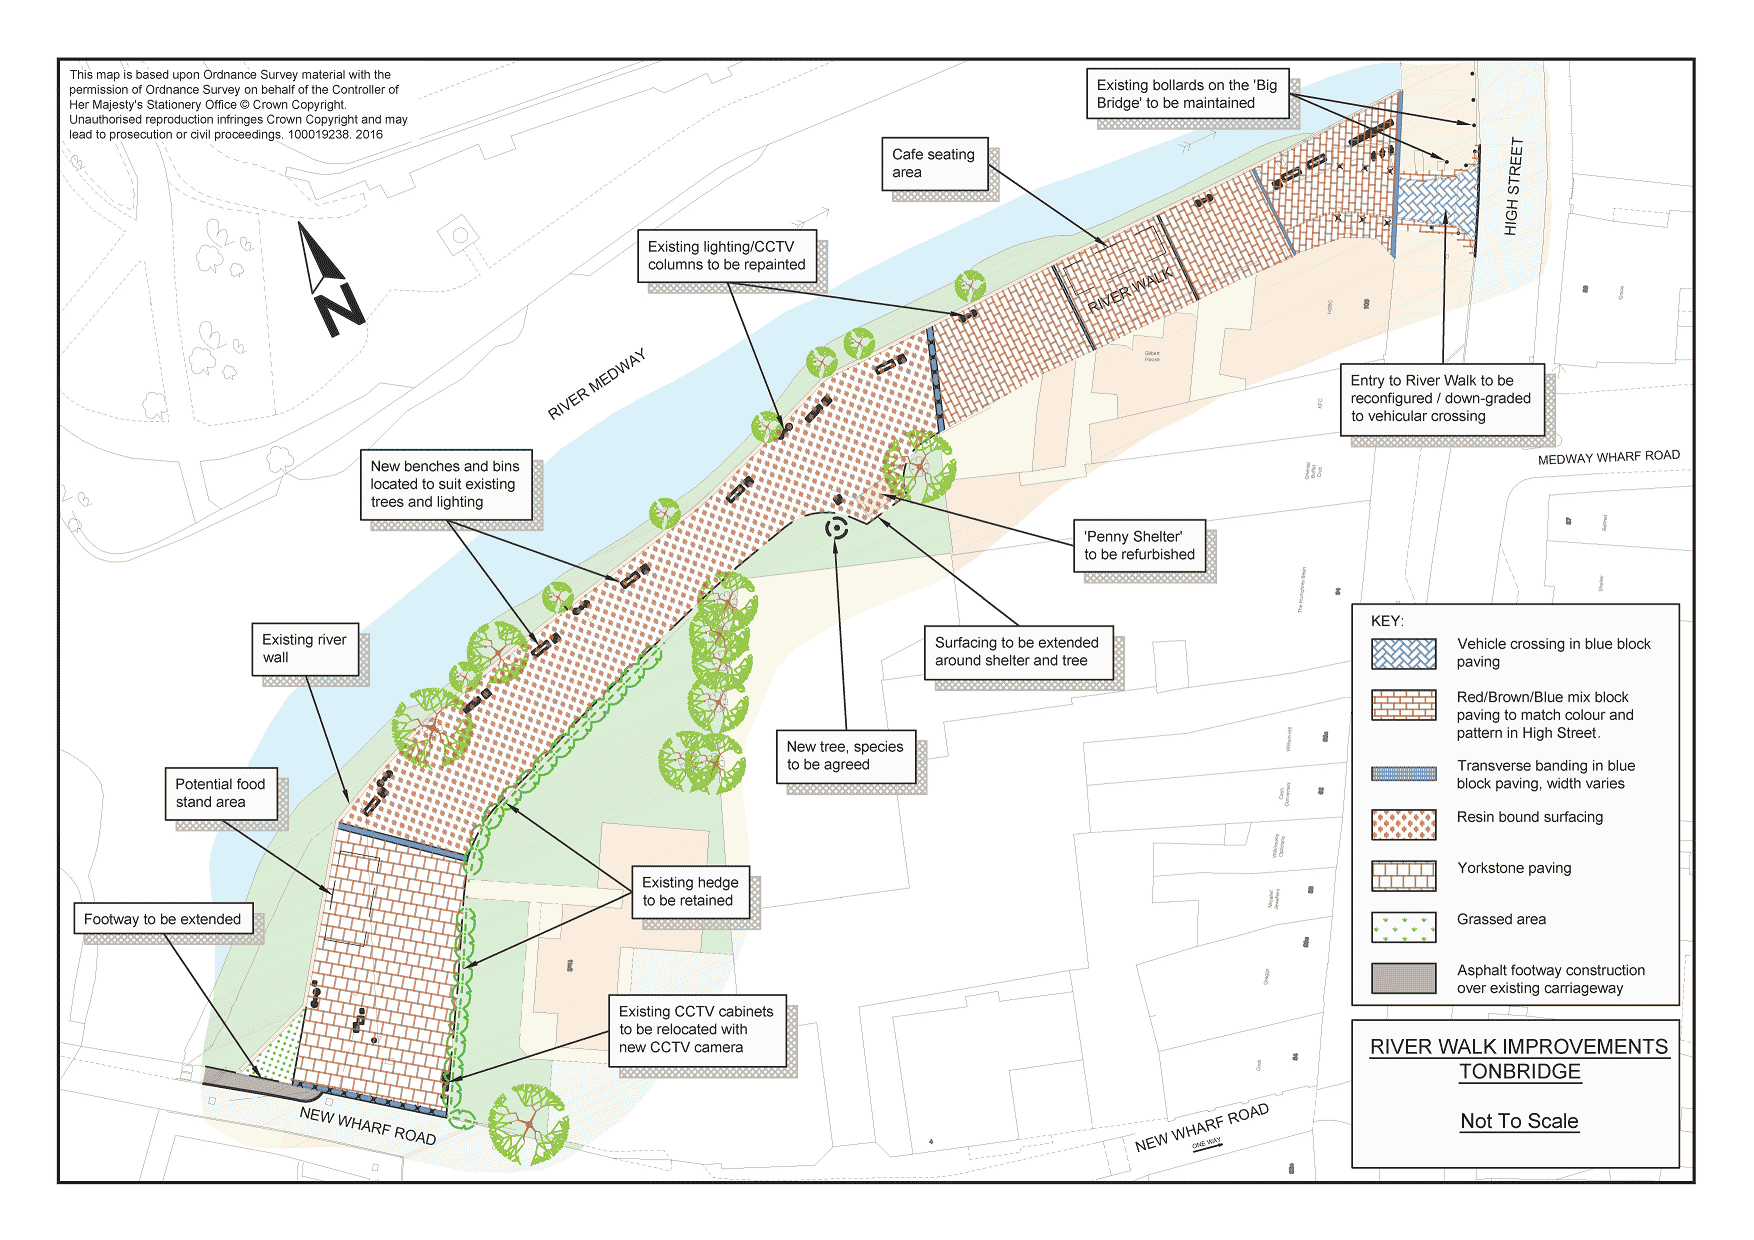 A map of the River Walk renovations